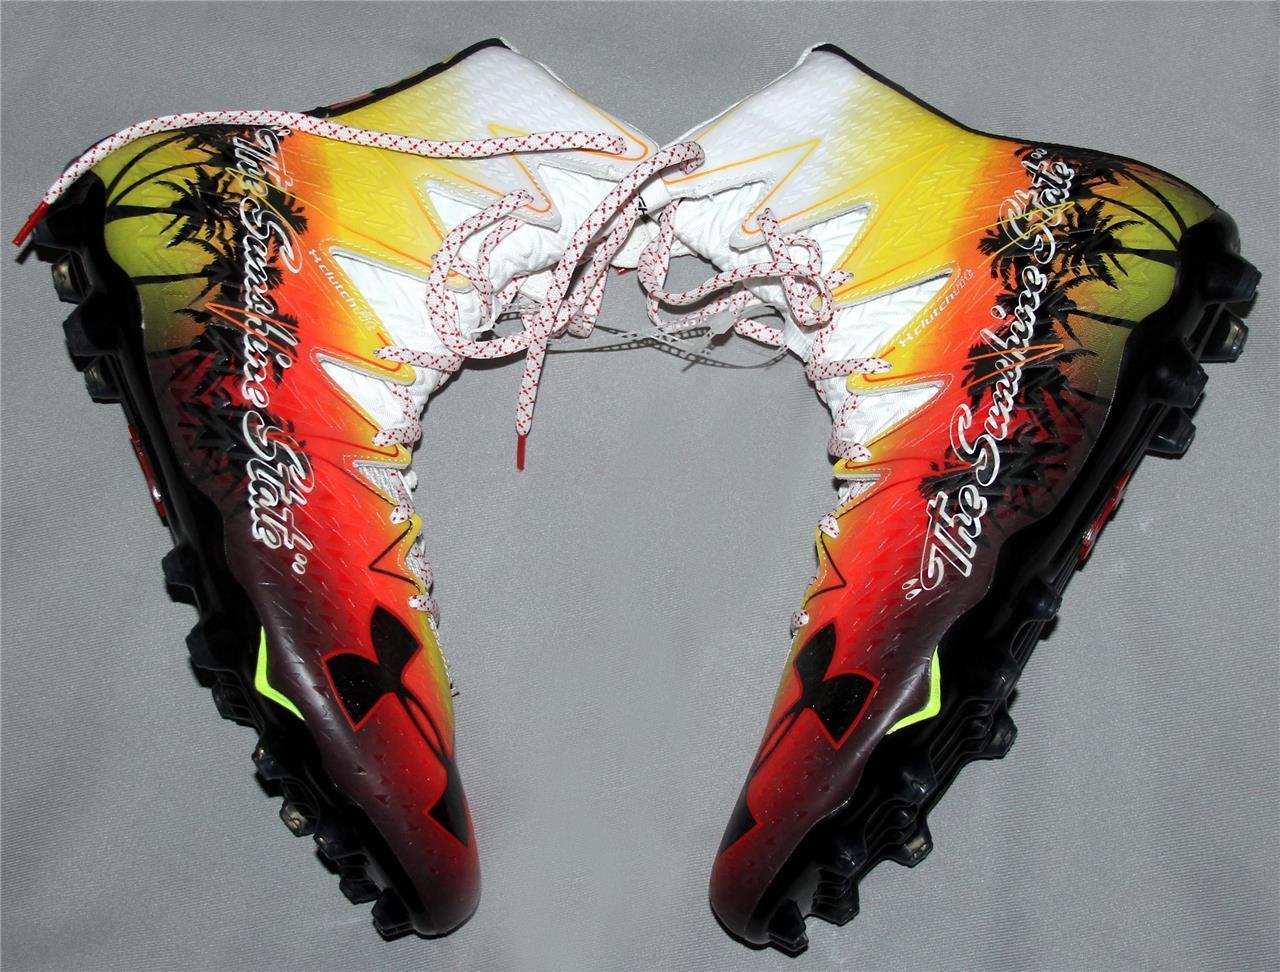 under armour state cleats